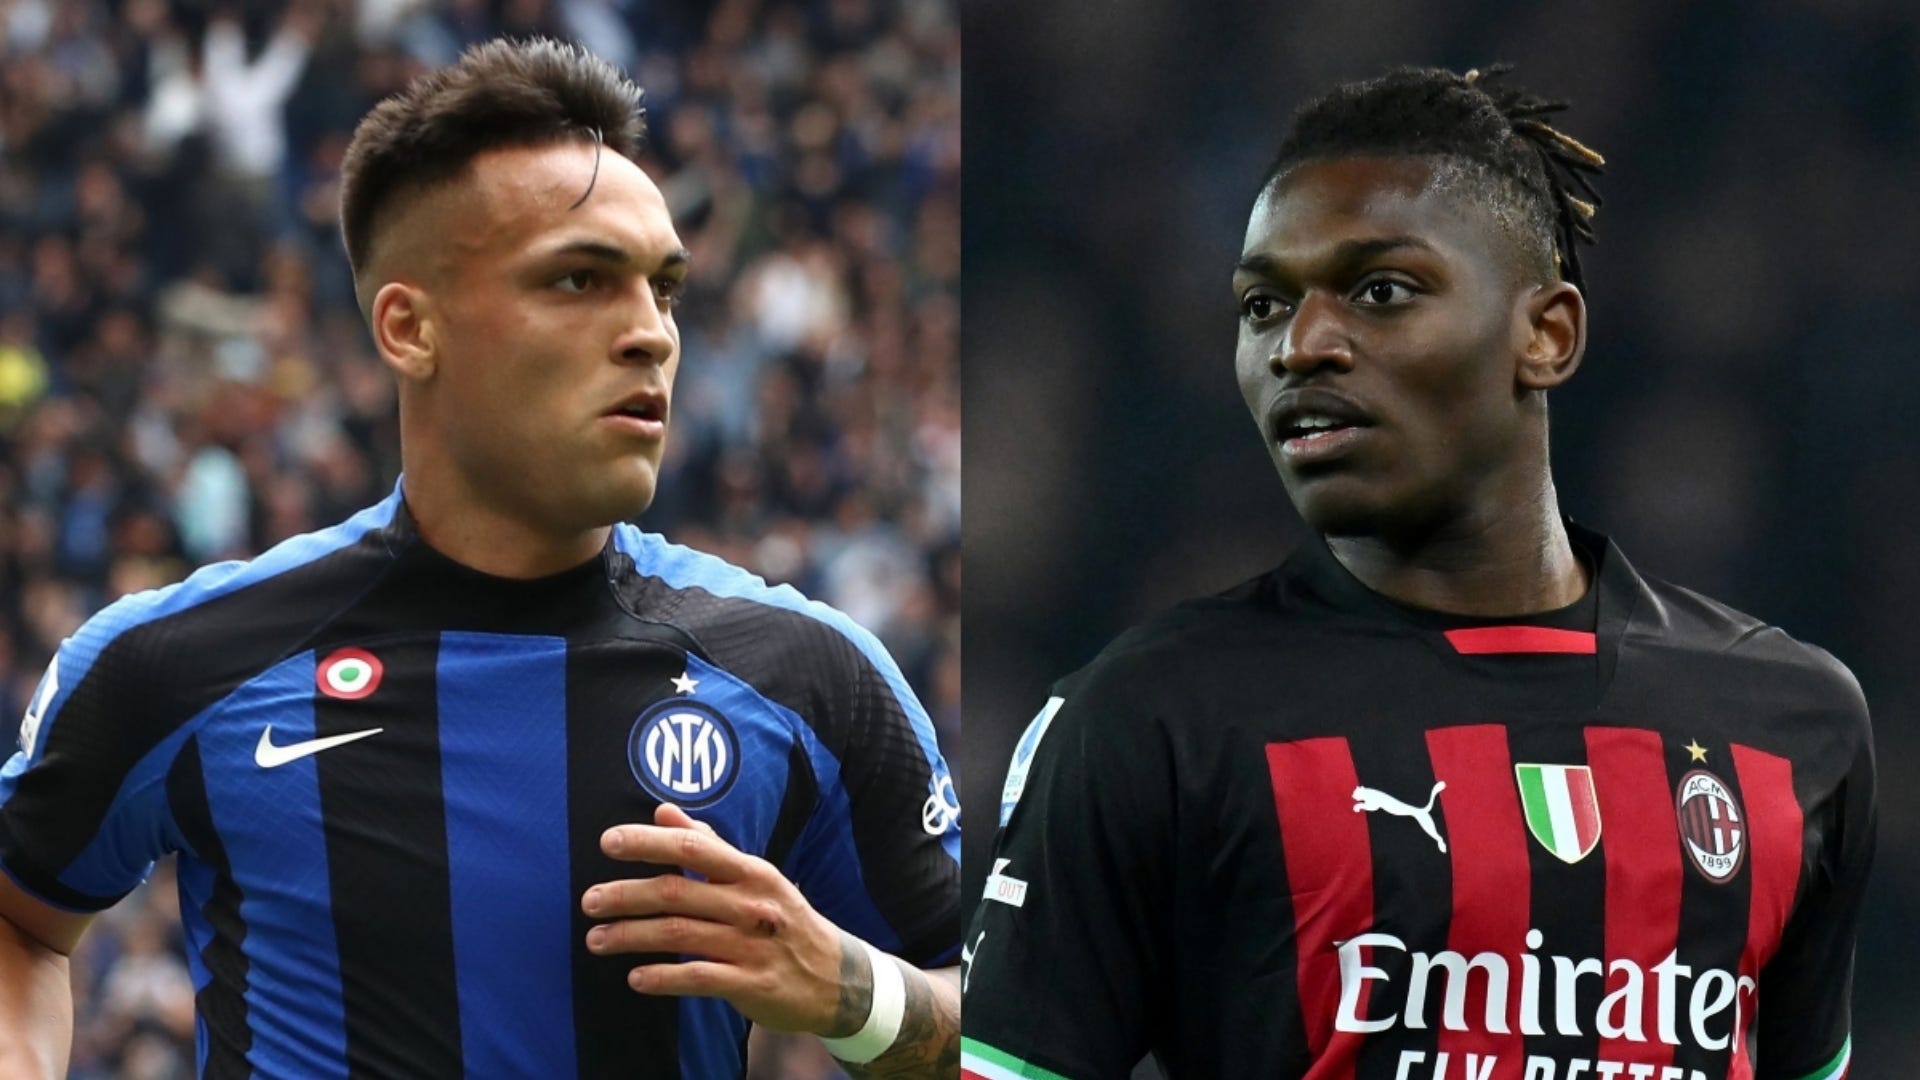 Inter vs Milan Where to watch the match online, live stream, TV channels, and kick-off time Goal US